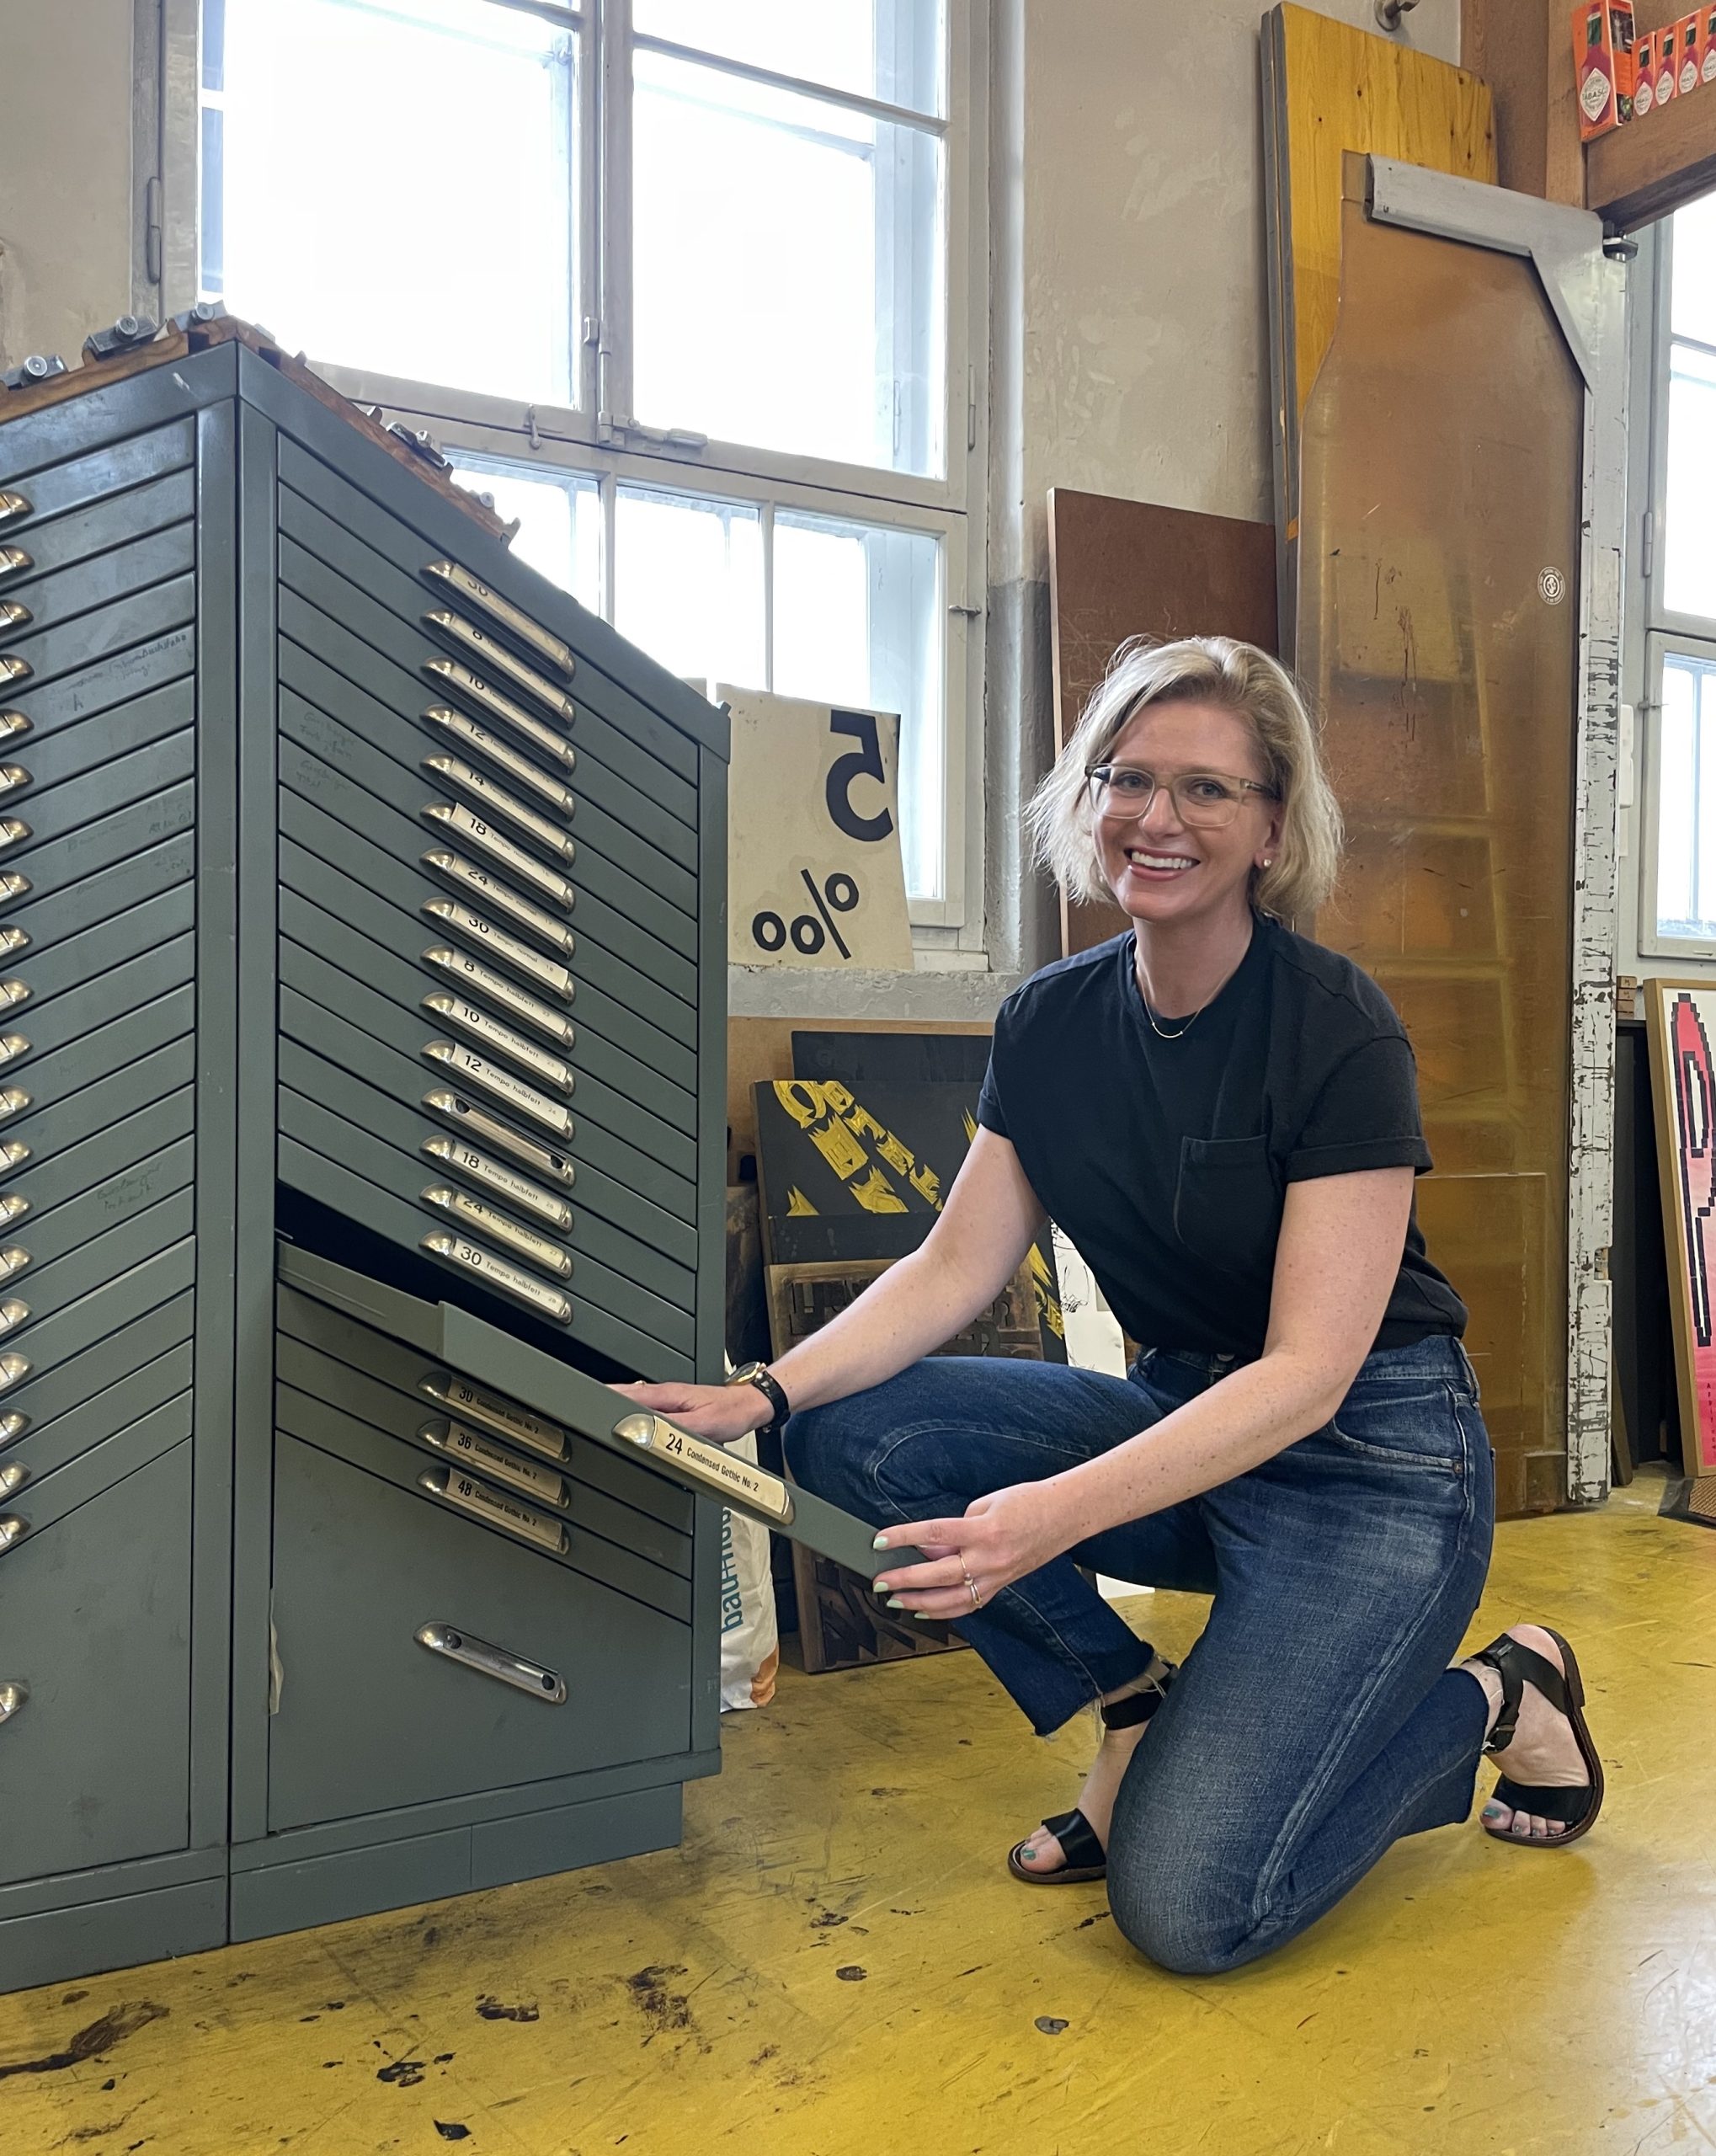 Photograph of a woman kneeling in front of a metal type case.